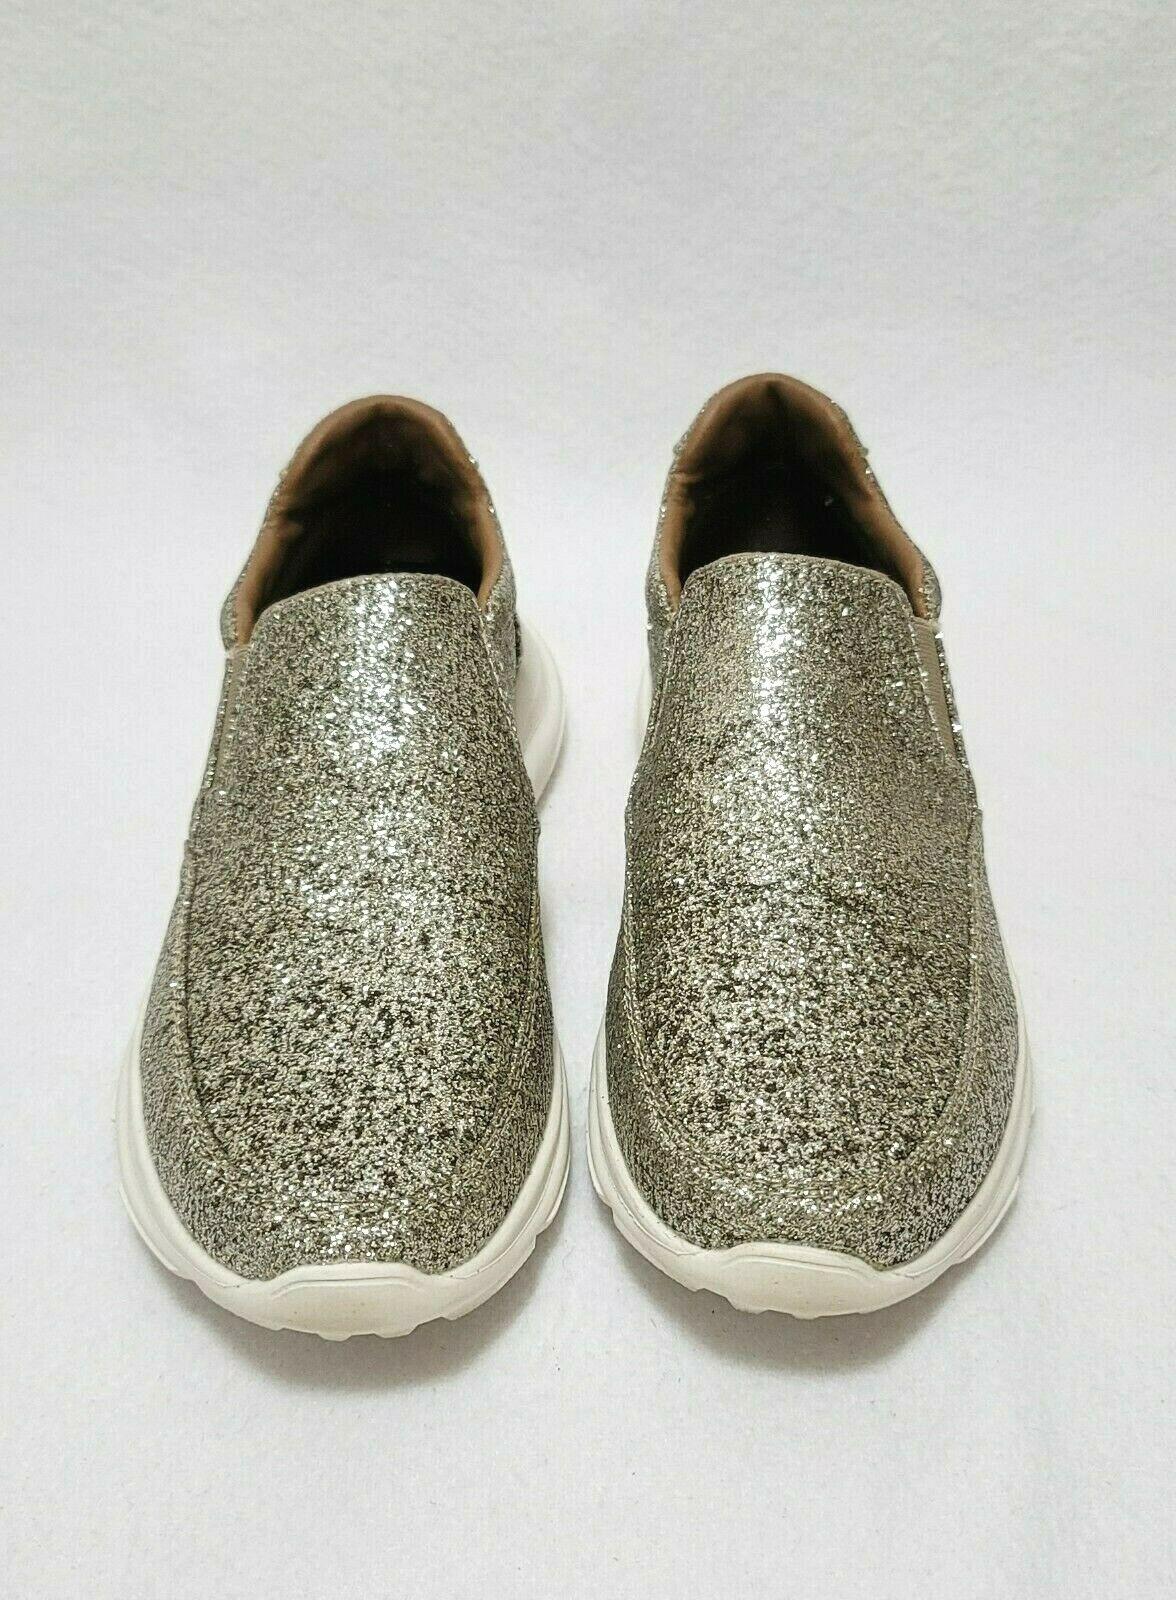 Joy & Mario Womens Shoes Slip On Glitter Gold Sneakers Size US 8 - SVNYFancy